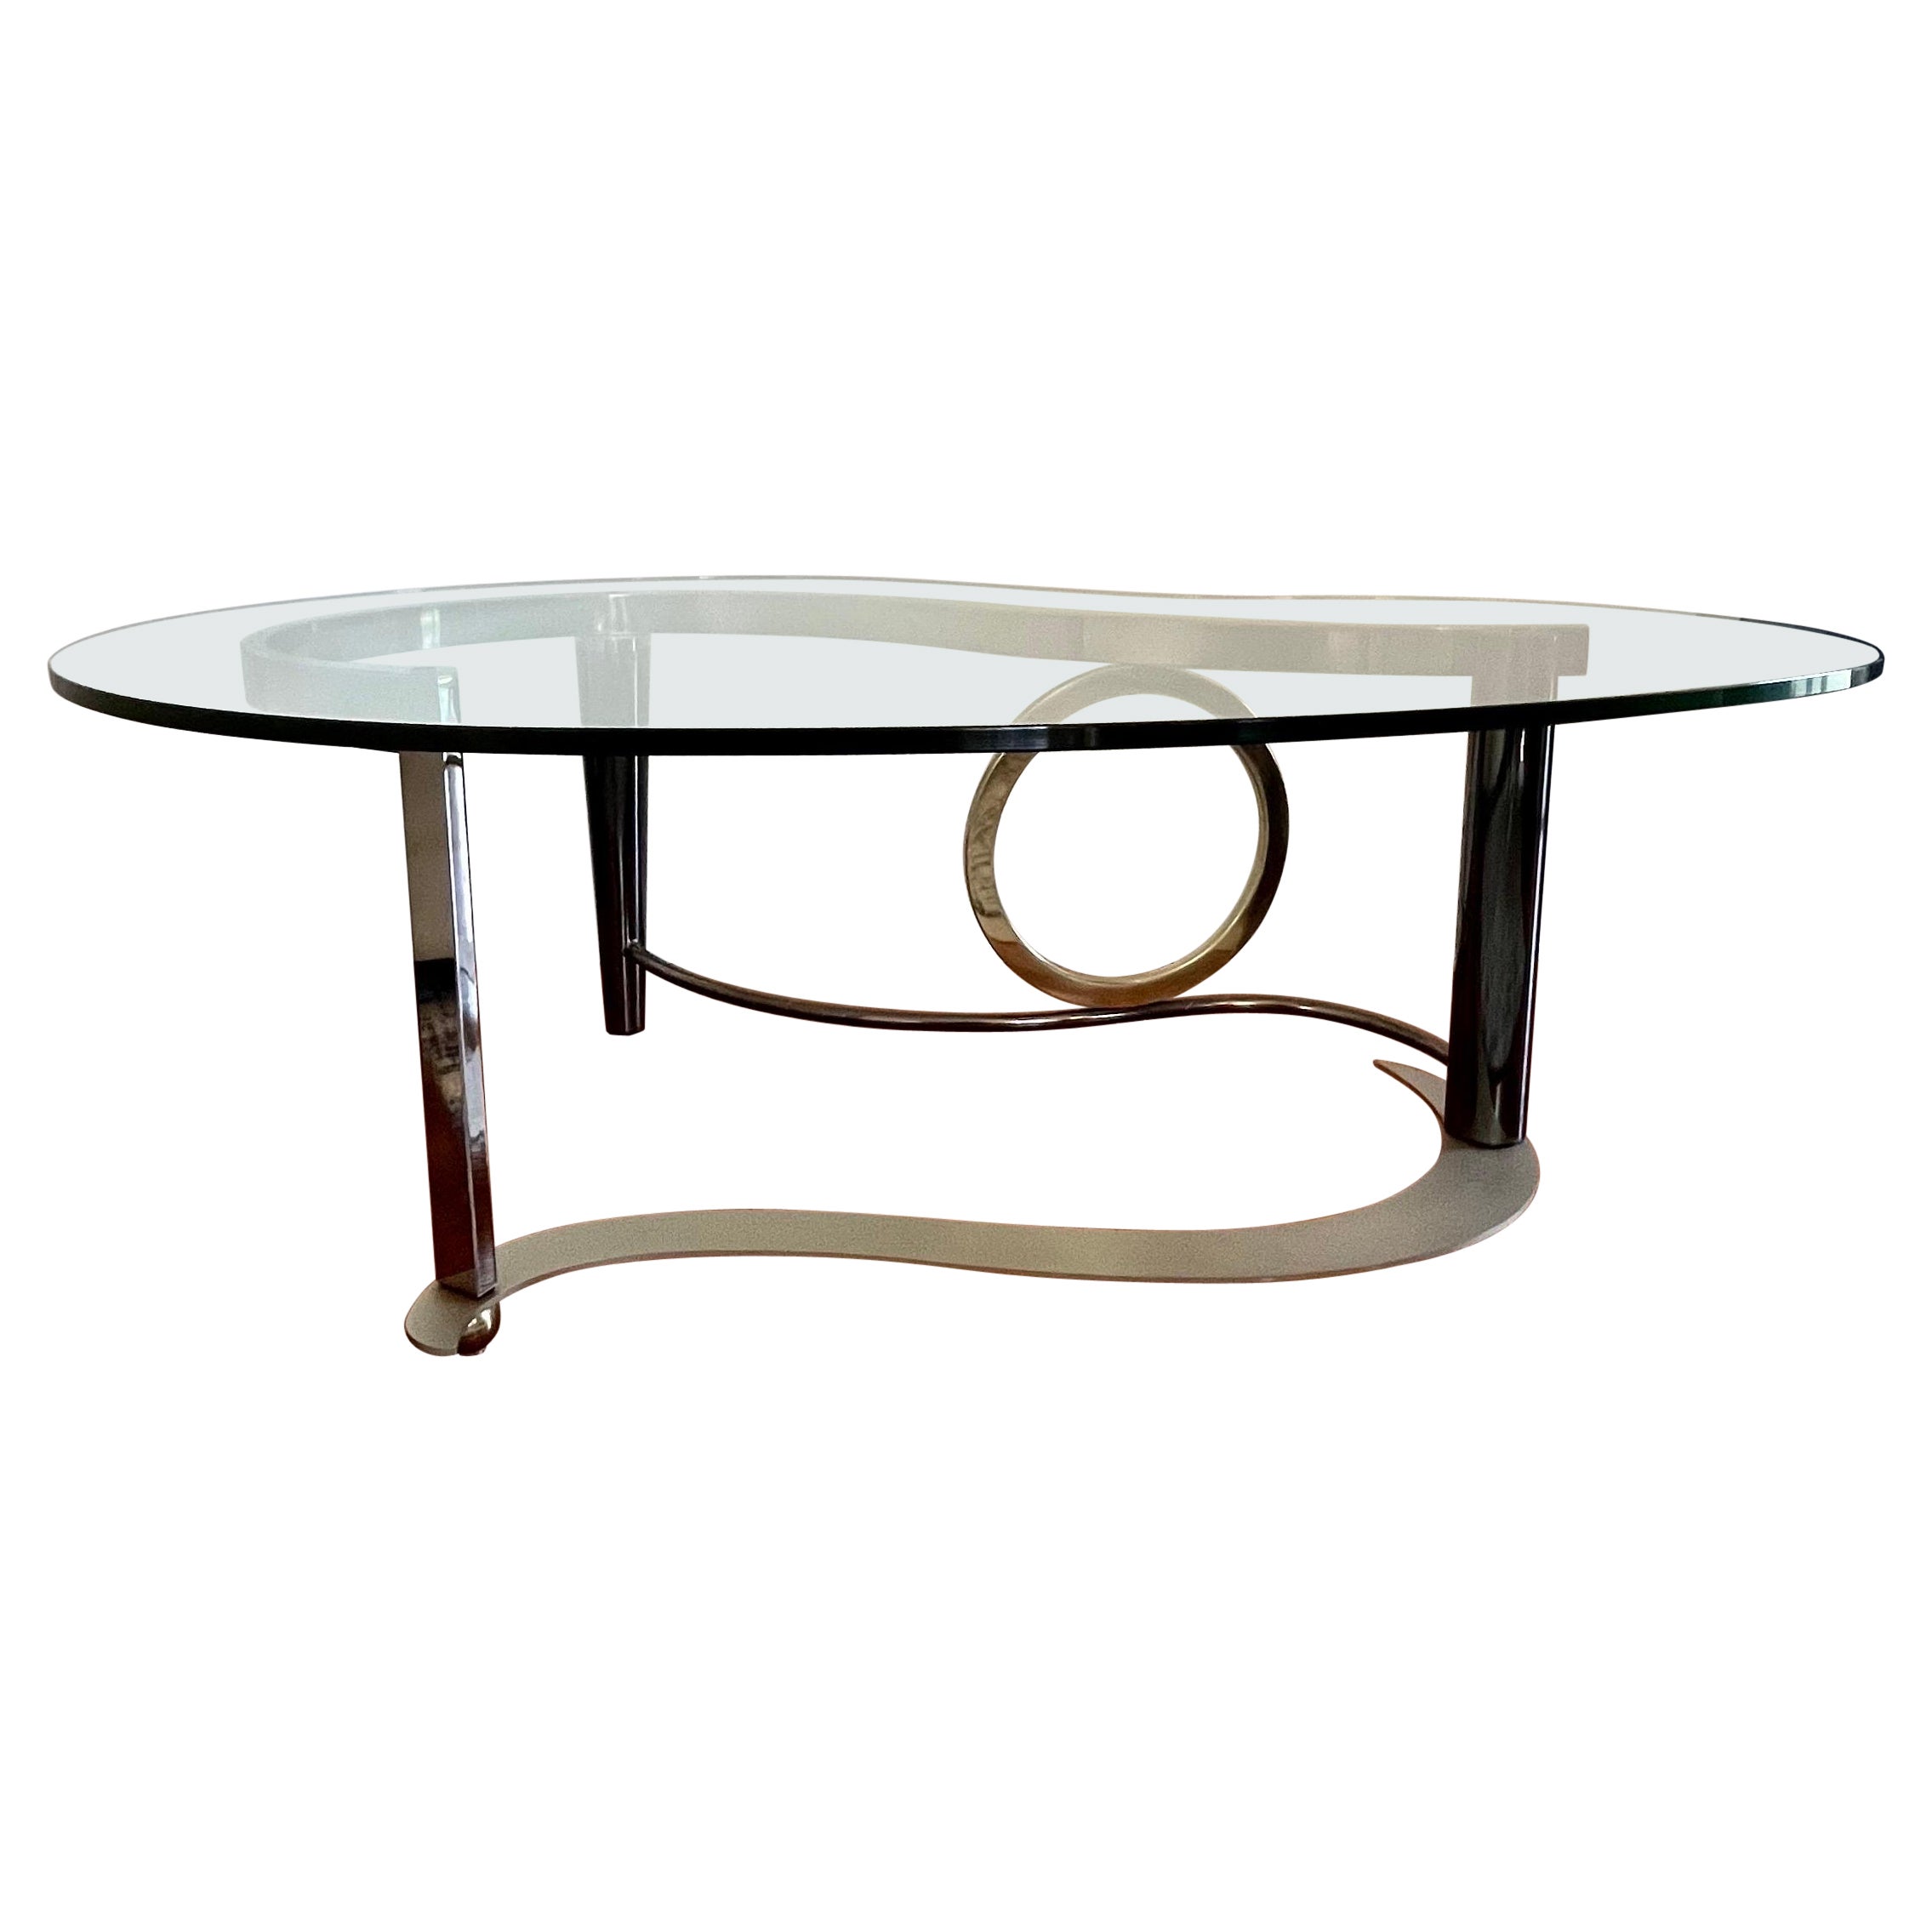 Postmodern DIA style steel and brass kidney shape coffee table